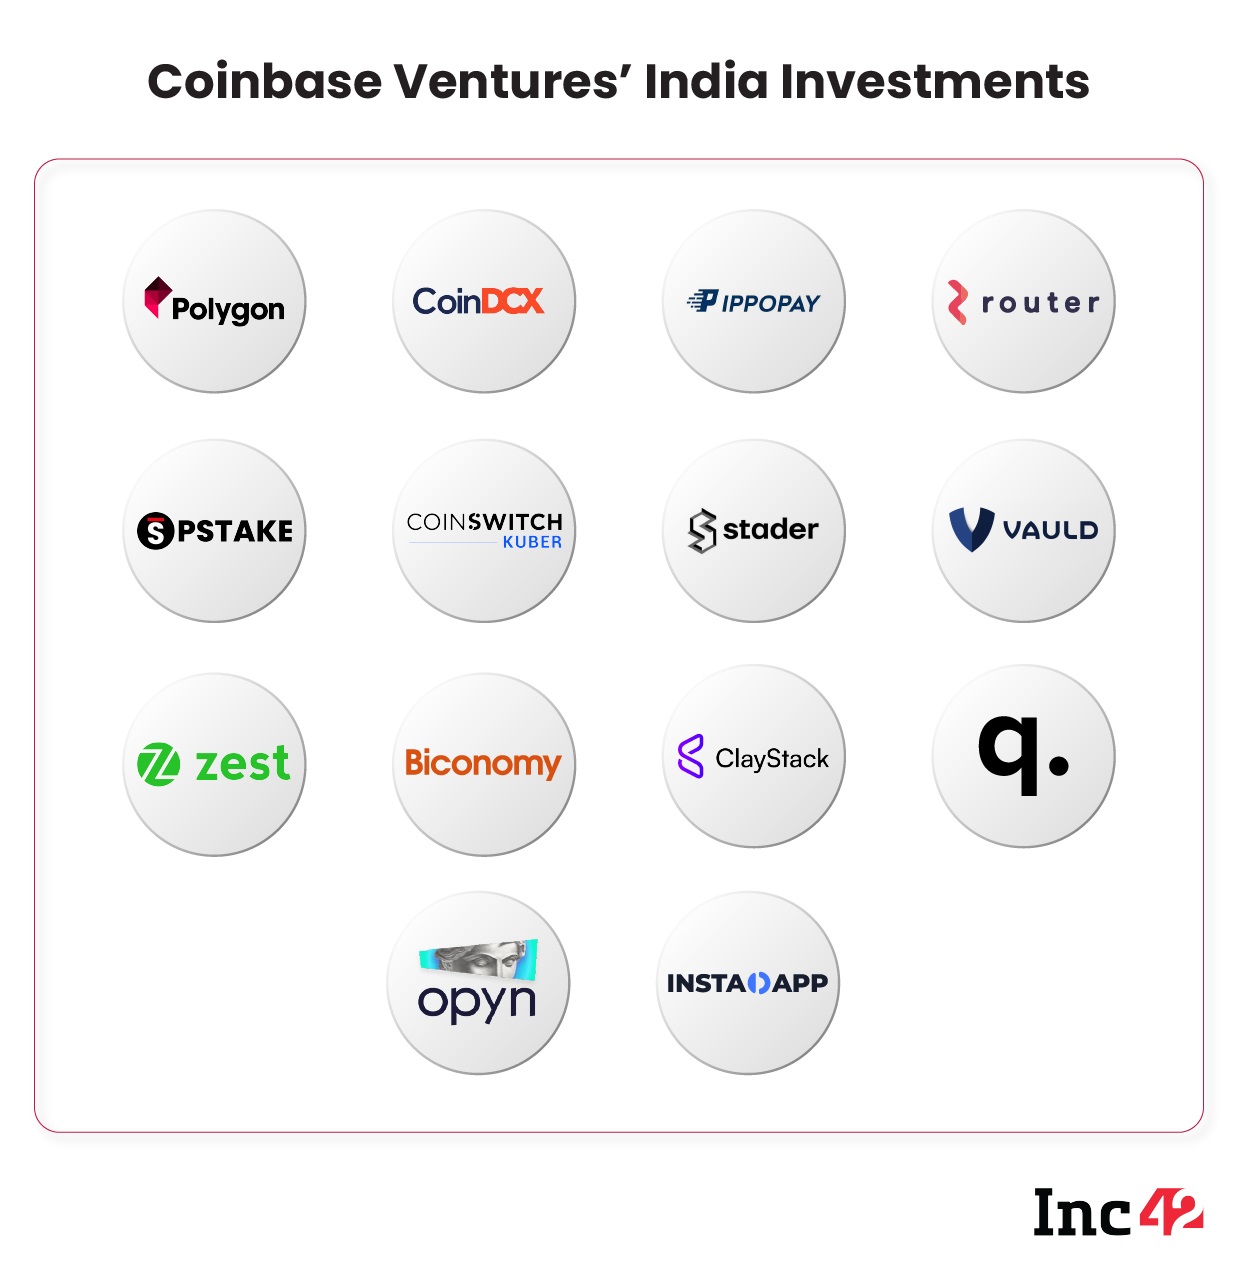 Coinbase Ventures India Investment